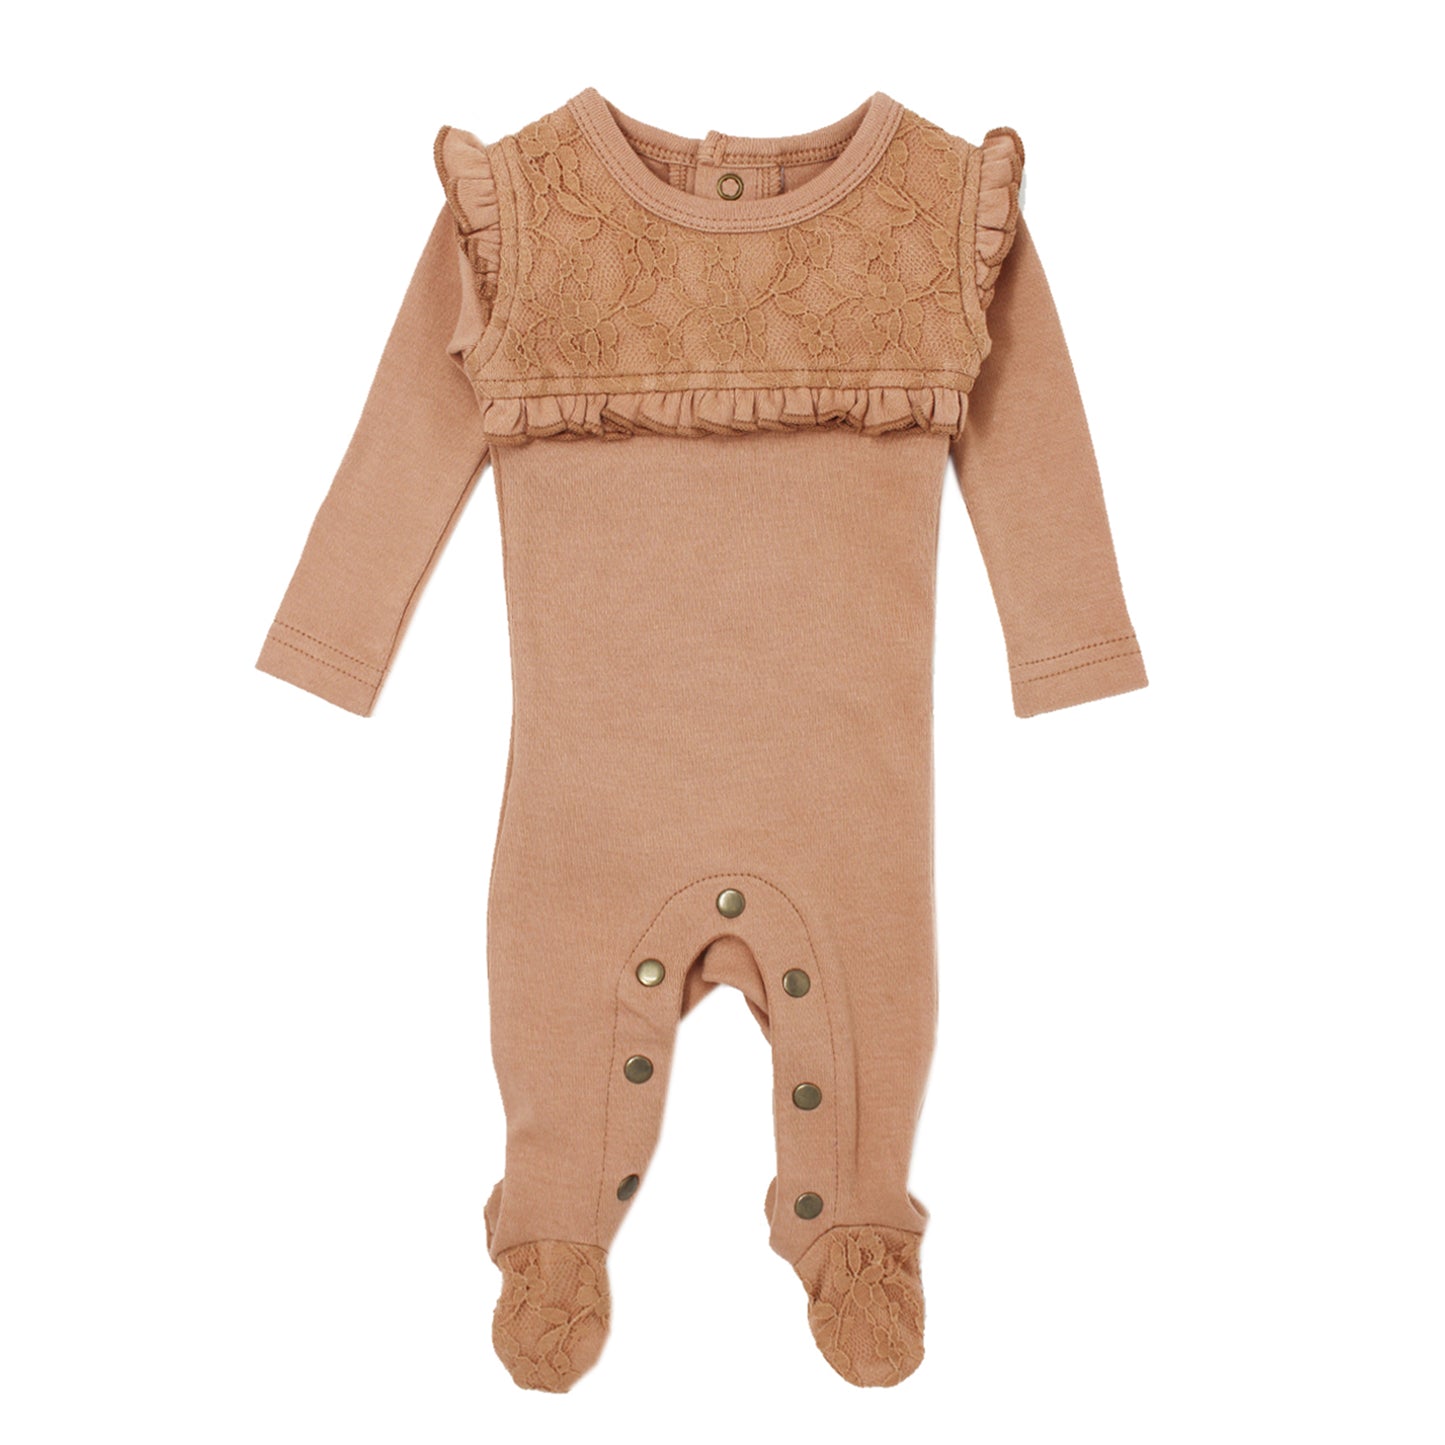 L'Oved Baby OR438 Organic Lace Overall